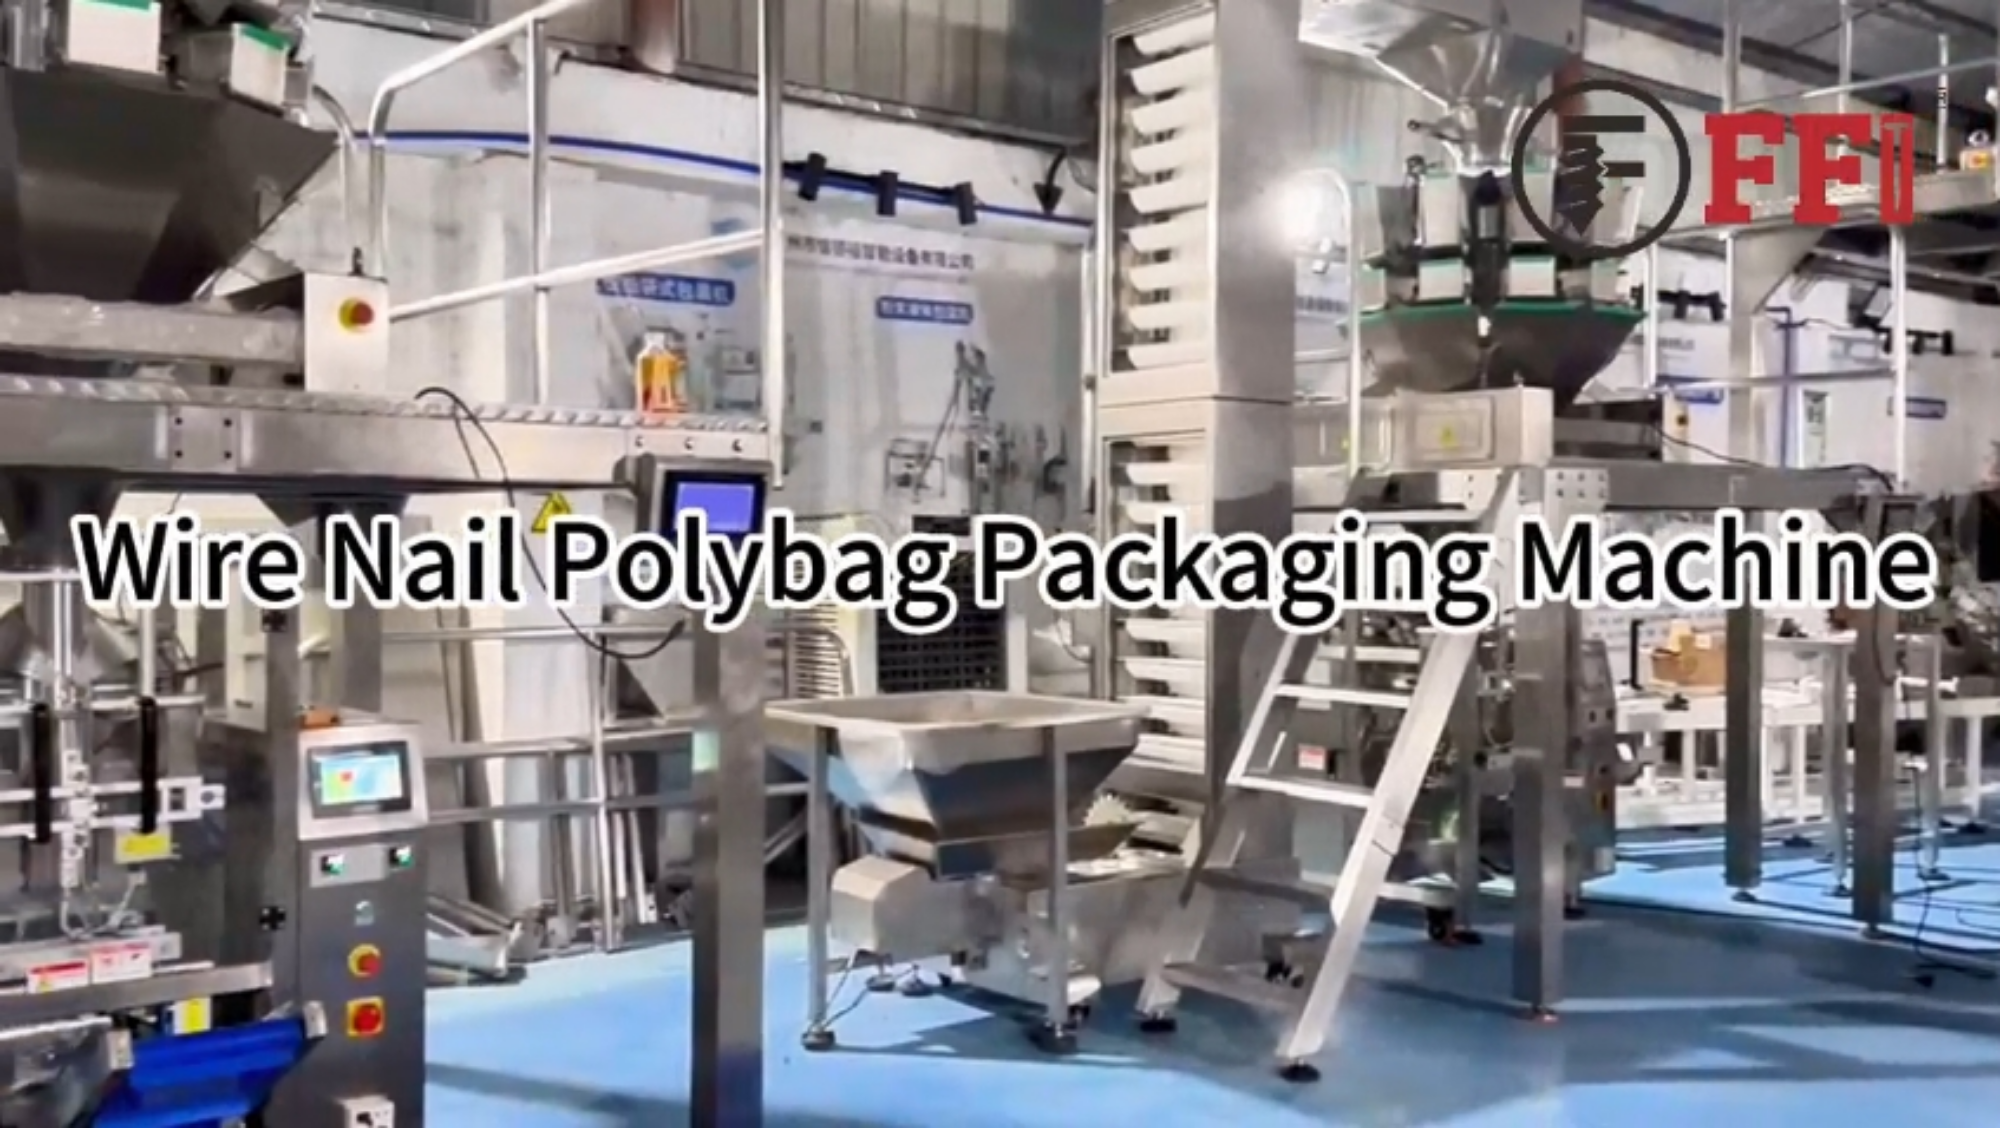 How Wire Nail Polybag Packaging Machine Works？